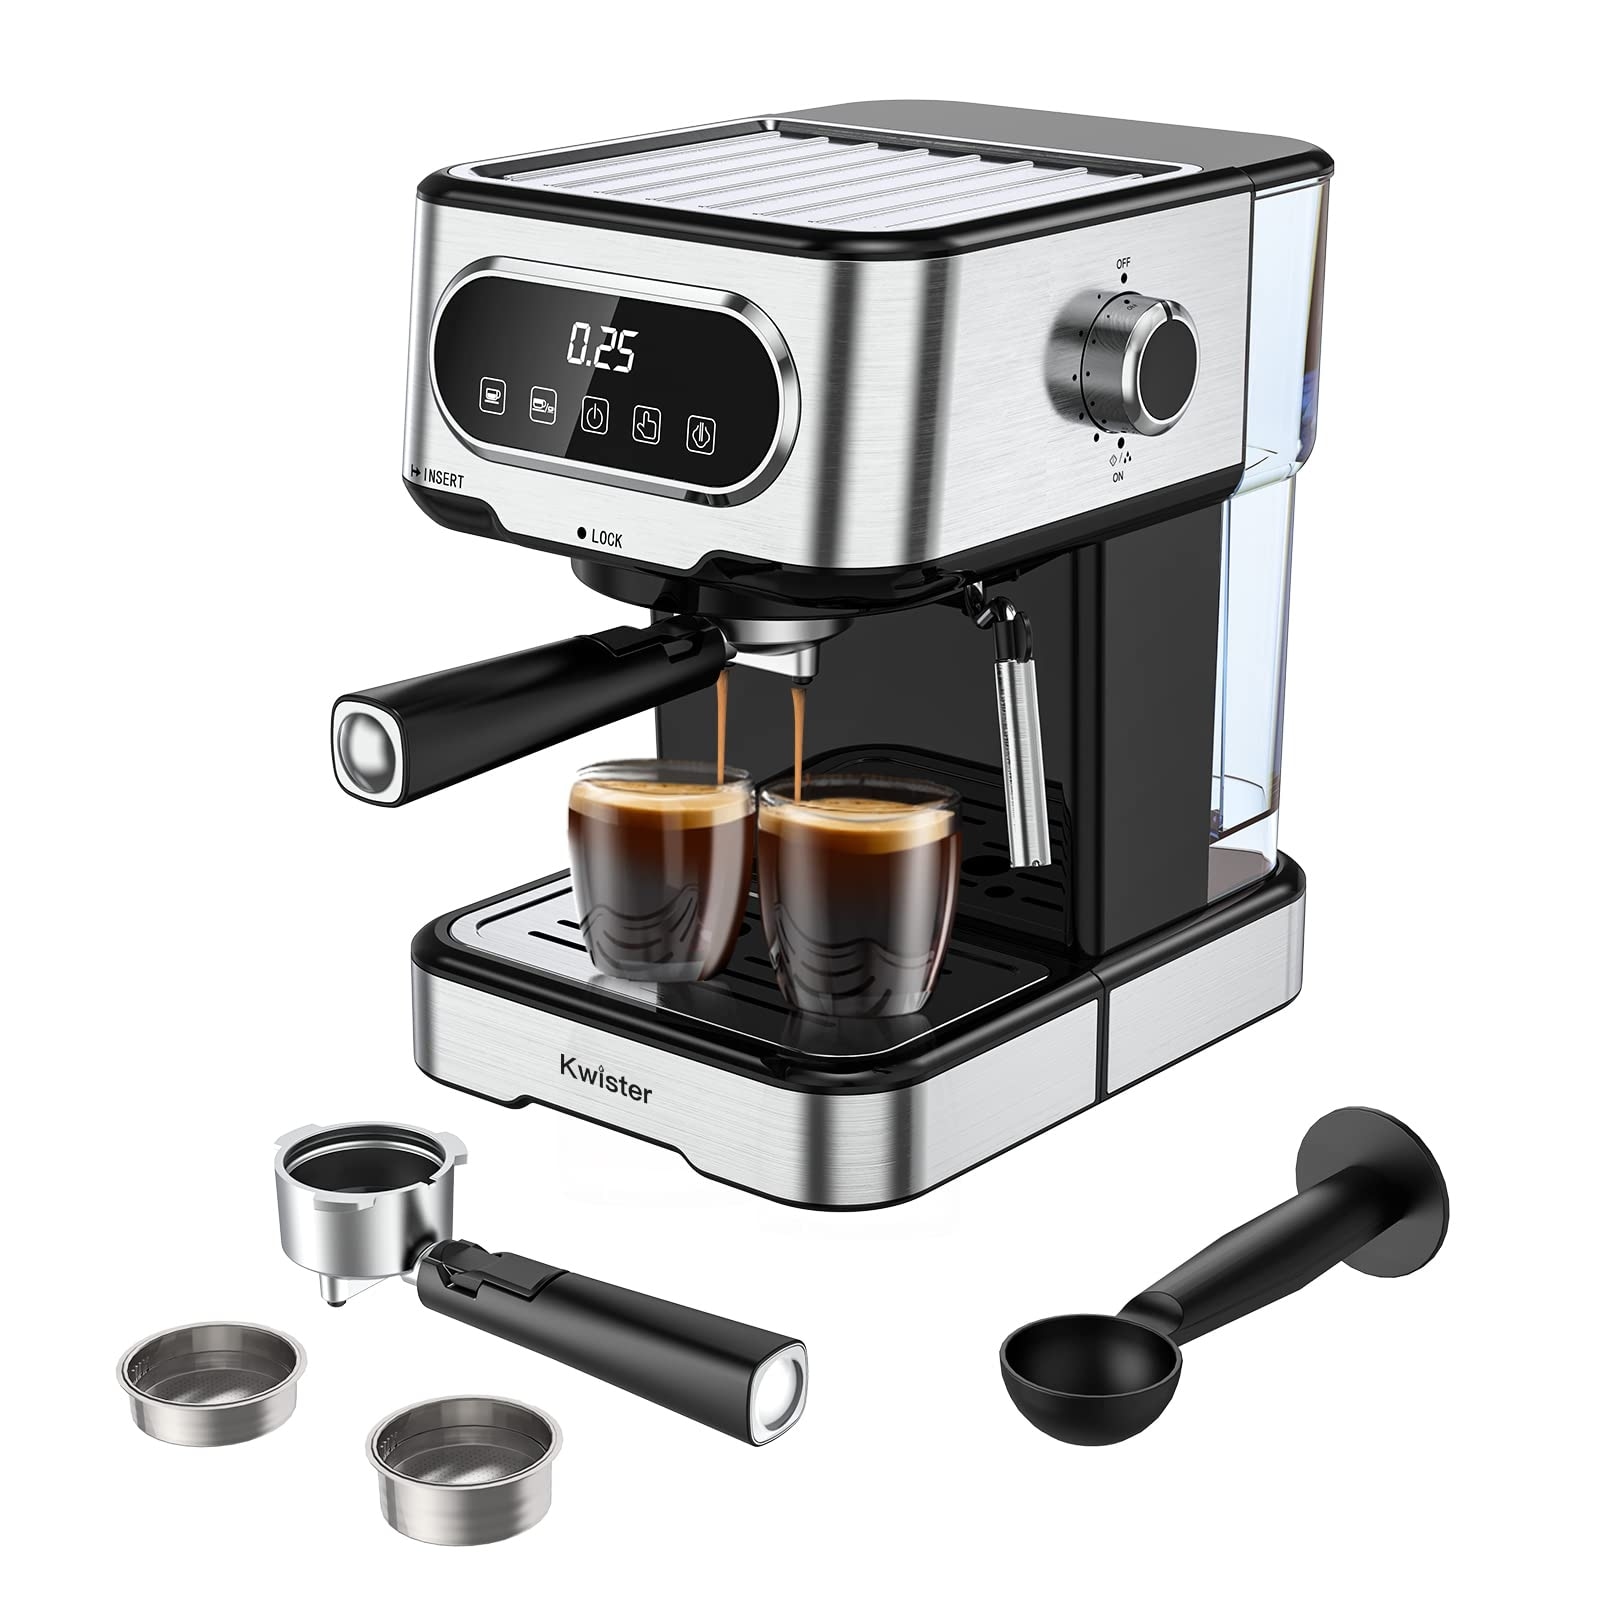 https://ak1.ostkcdn.com/images/products/is/images/direct/860eda485ecccb4bcebedc5a98bd26d90842531a/Espresso-Machine-15-Bar%2C-Espresso-and-Cappuccino-Machine-with-Milk-Frother%2C-Espresso-Maker-with-Steamer-with-50-oz-Water-Tank.jpg